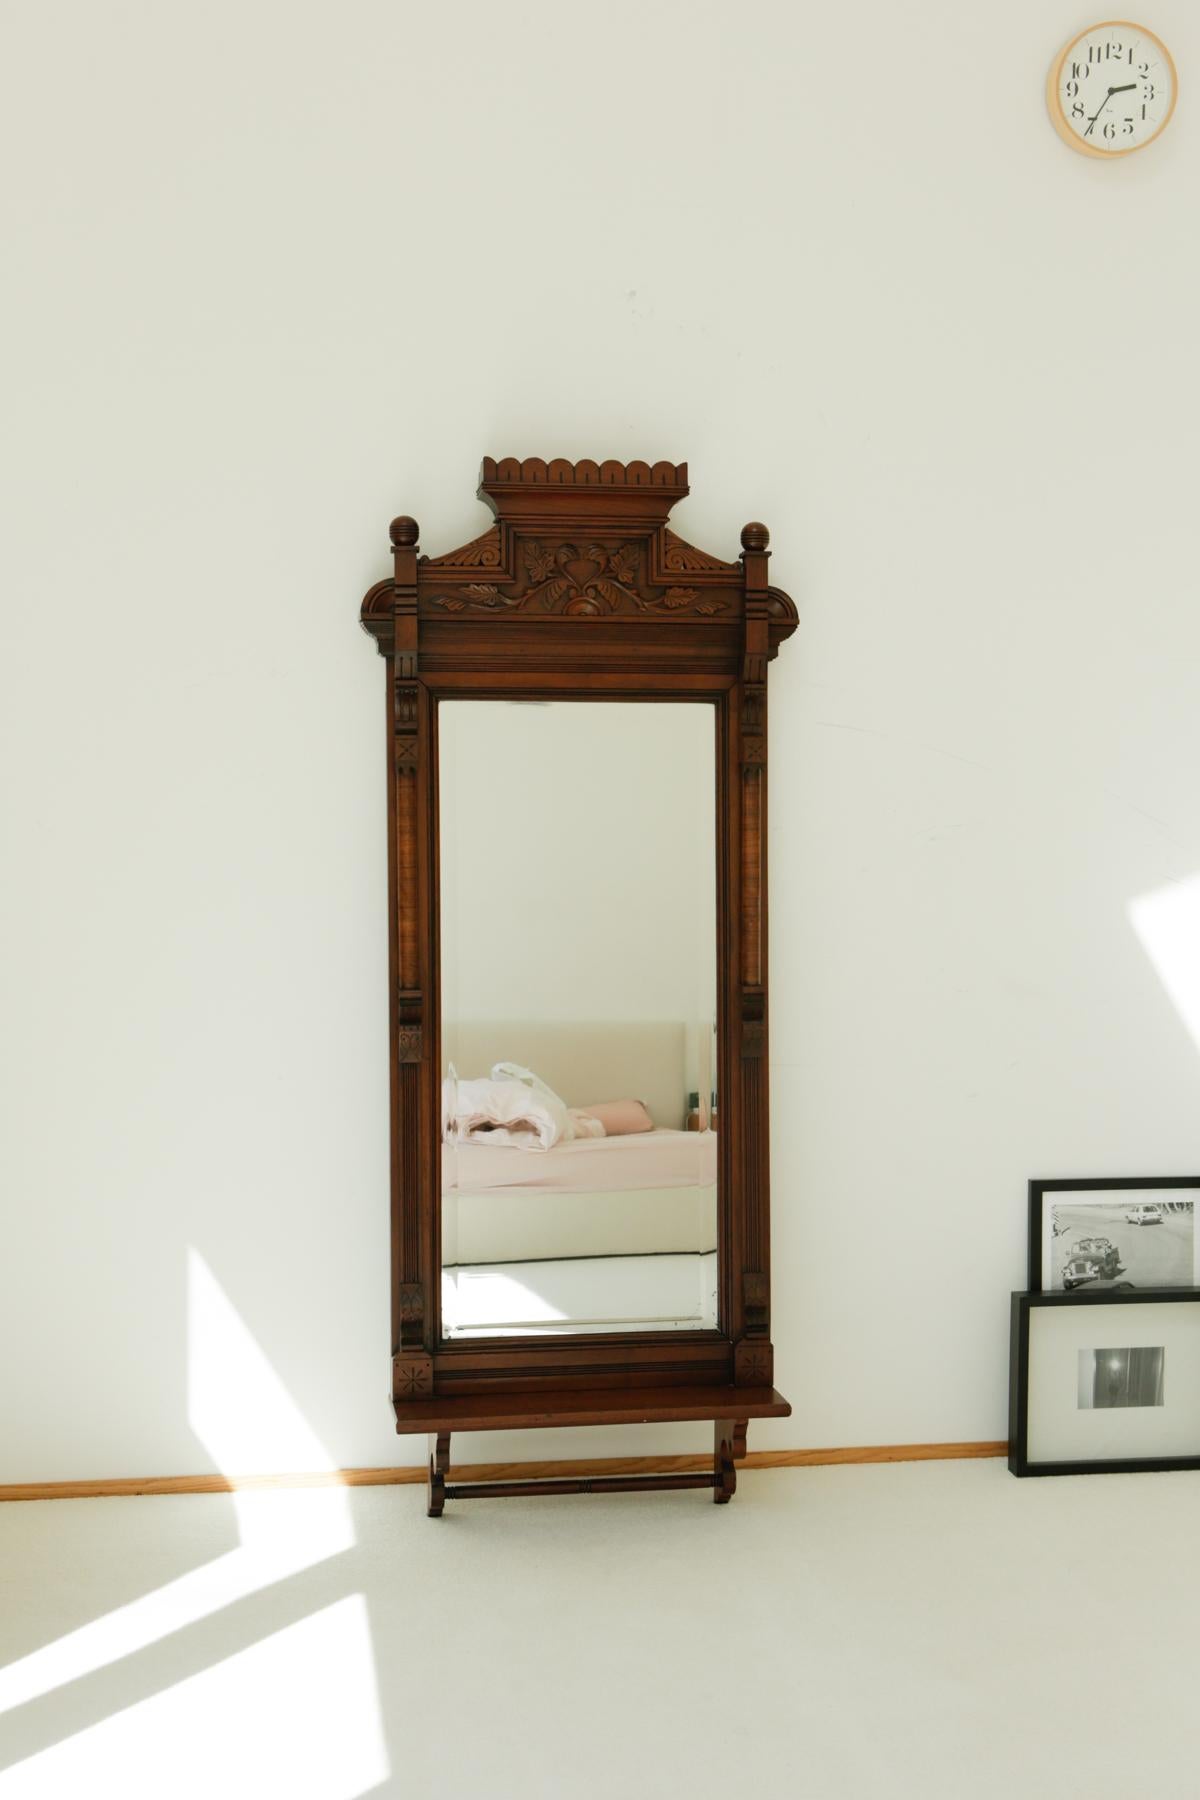 Circa 1820s carved solid mahogany wall mirror with shelf.

Say hello to your next best mirror! At the top of the finely carved wood arch are leaf engravings, forming a heart shape in the middle. Comes with a small shelf or vanity space. Great for